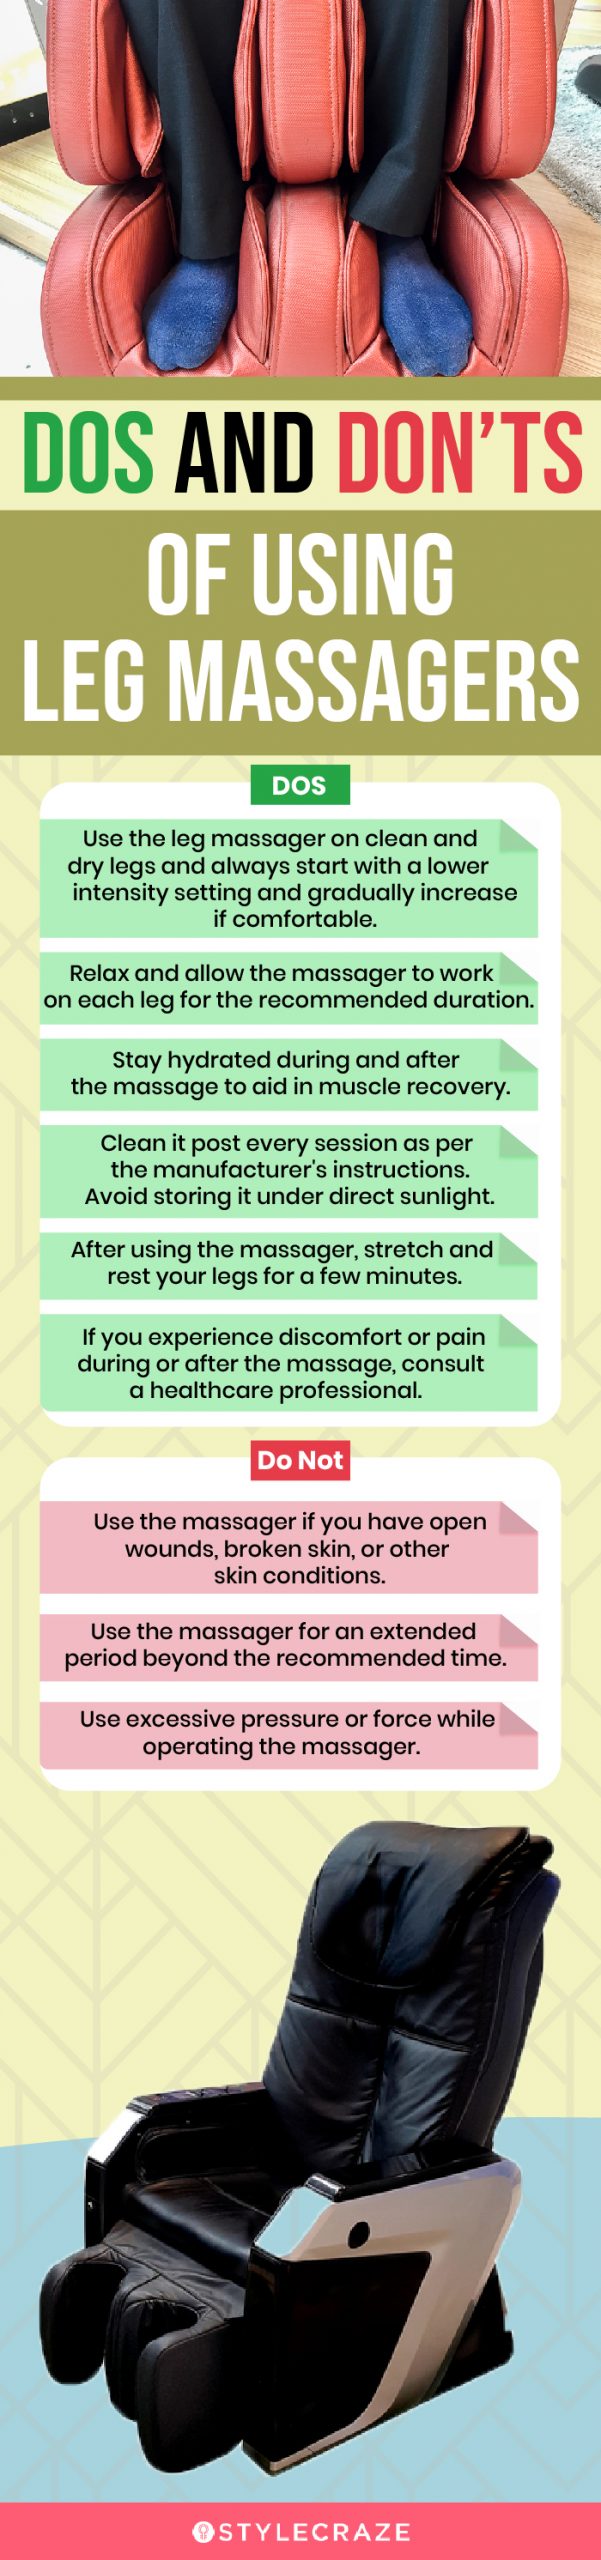 Dos And Don’ts Of Using Leg Massagers (infographic)